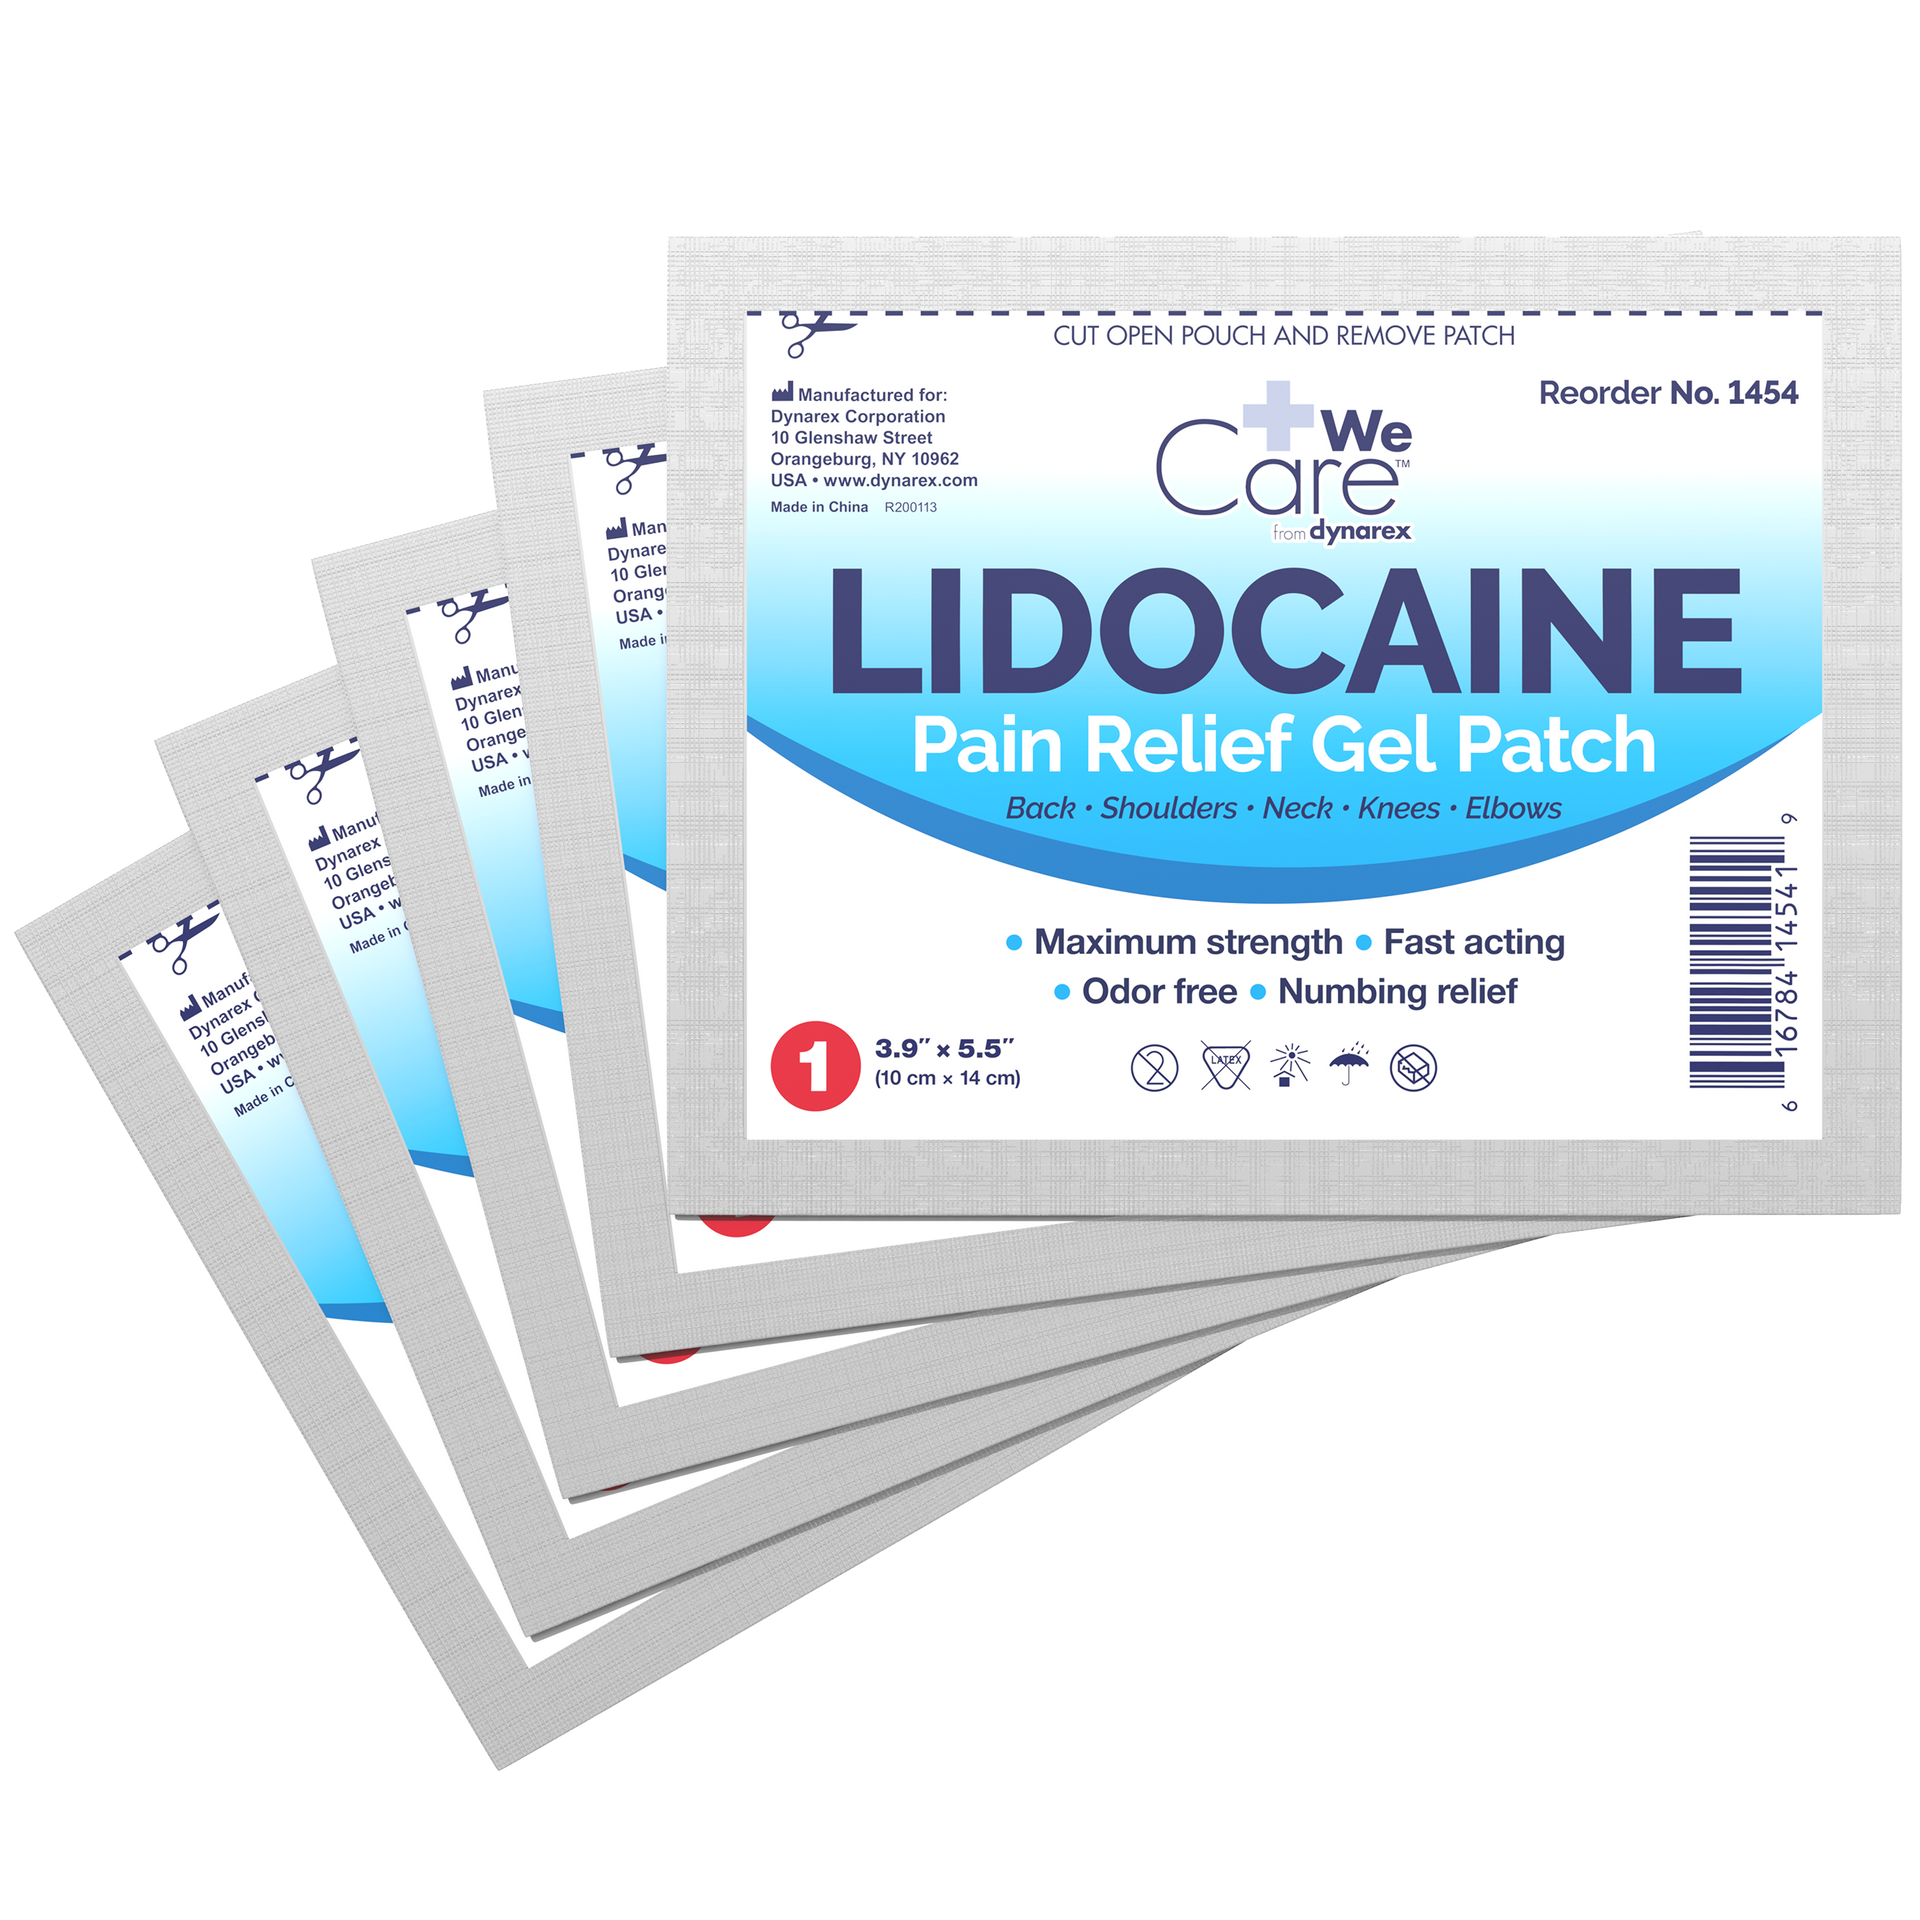 Dynarex WeCare Lidocaine Pain Relief Gel Patches - Box of 5 - Senior.com Pain Relievers